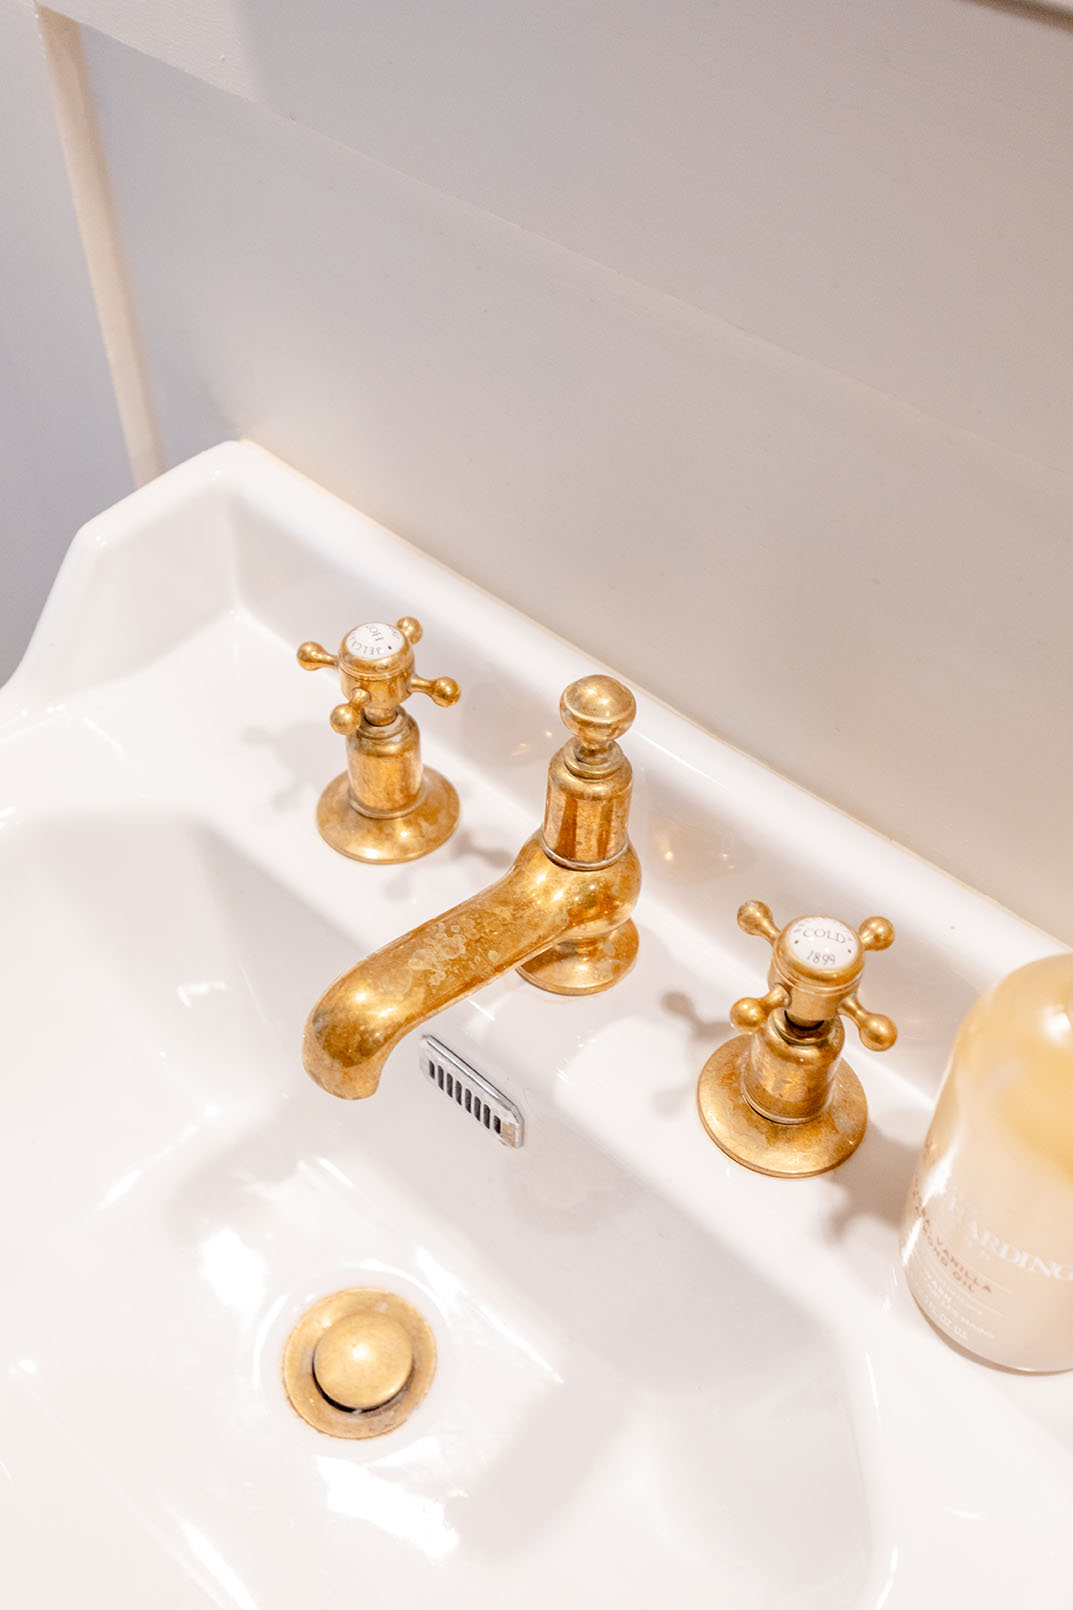 high angle view of a vanity unit with bronze gold coloured taps.